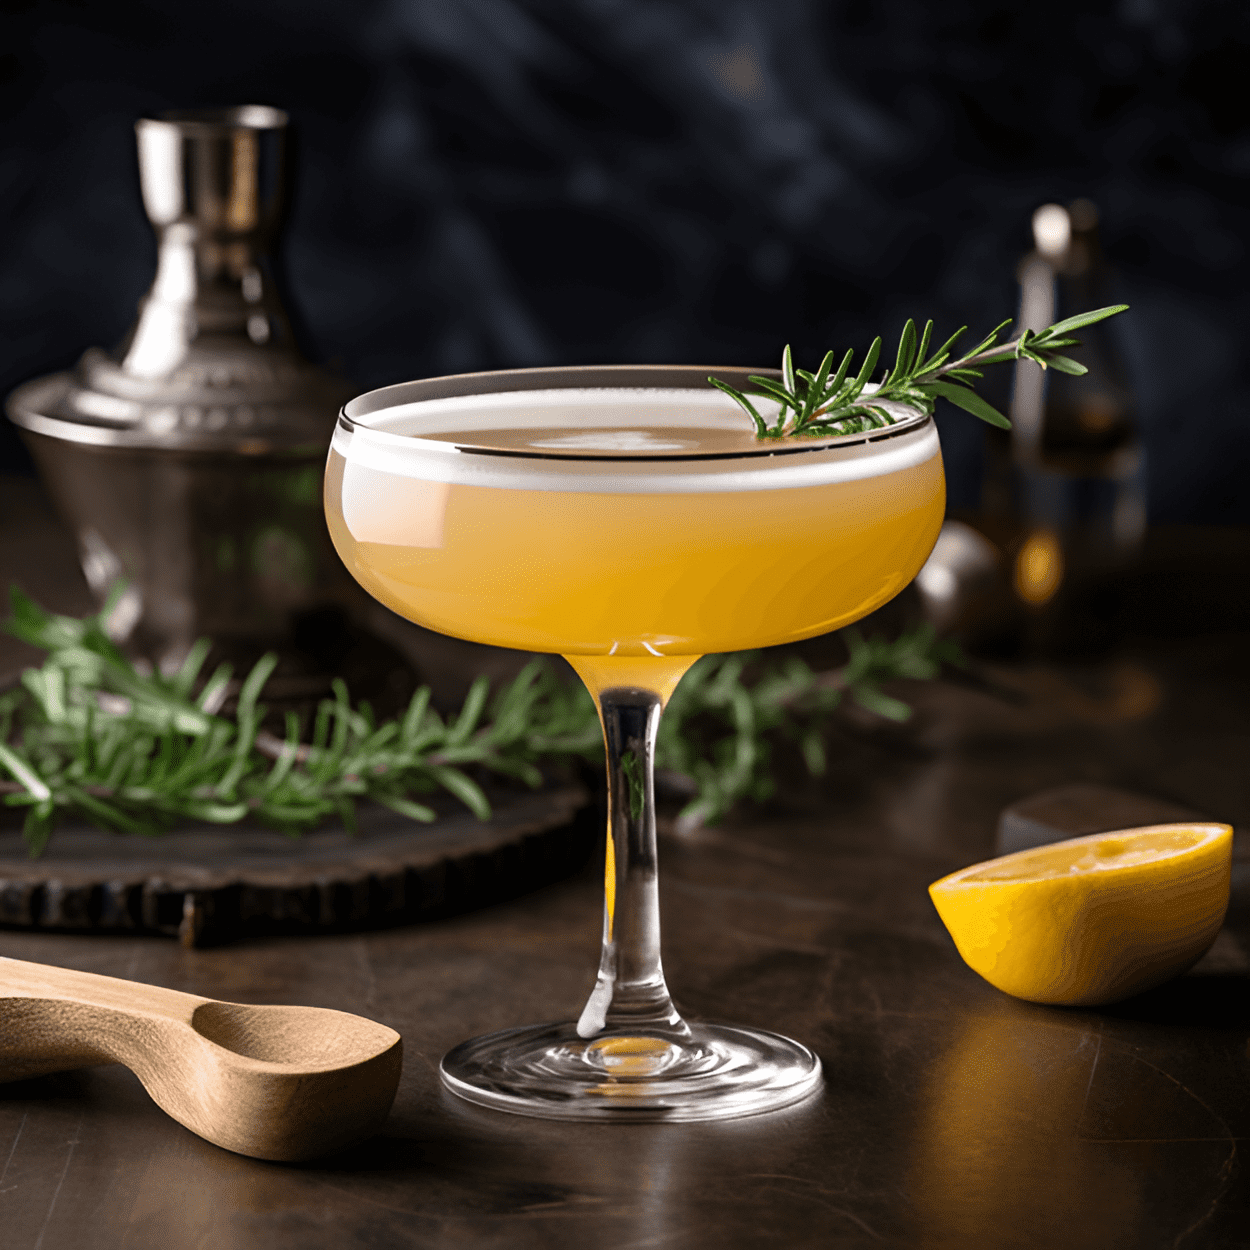 Brandy Fix Cocktail Recipe - The Brandy Fix is a well-balanced cocktail with a sweet and sour taste. It has a smooth, velvety texture with a hint of fruitiness from the brandy. The lemon juice adds a refreshing tang, while the sugar syrup provides a subtle sweetness that complements the rich flavors of the brandy.